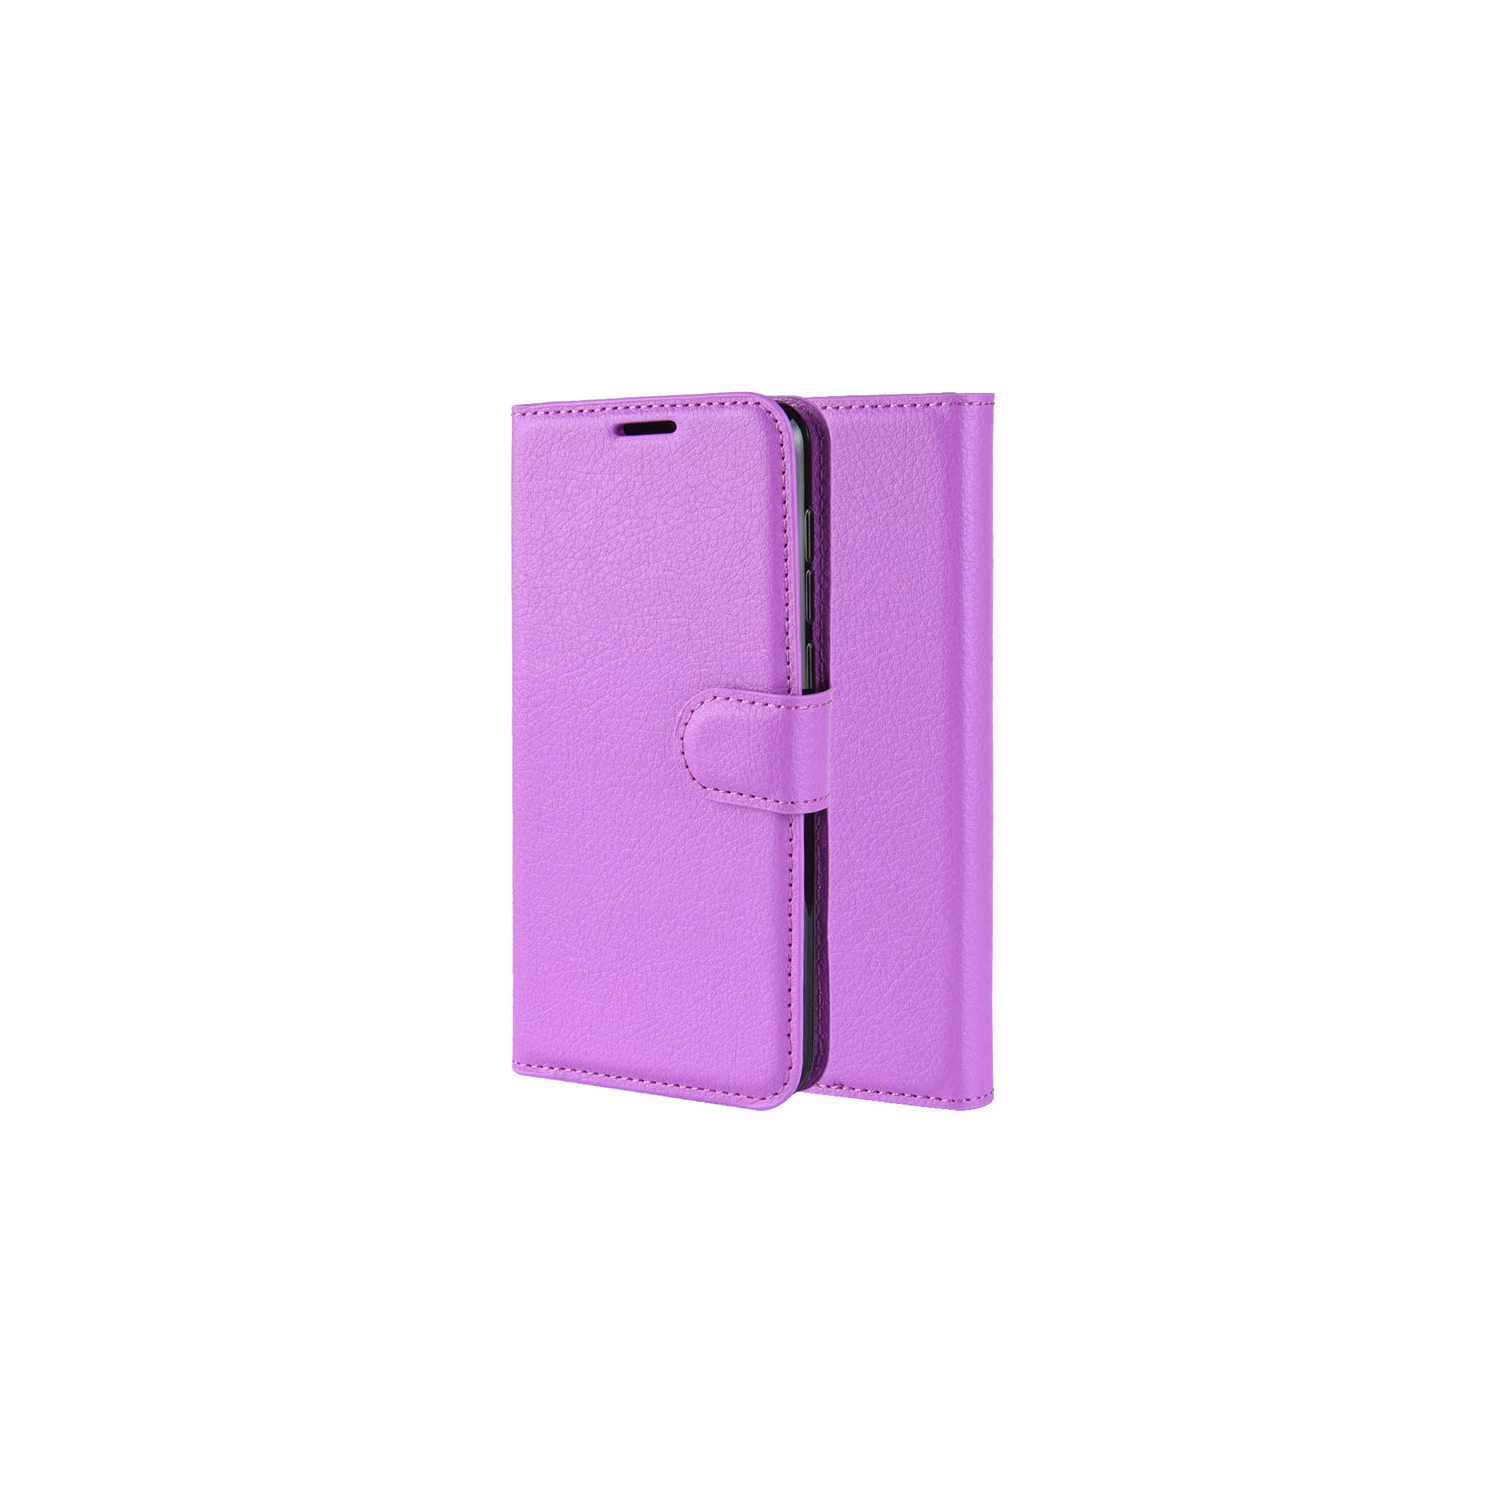 PANDACO Purple Leather Wallet Case for iPhone 13 Pro